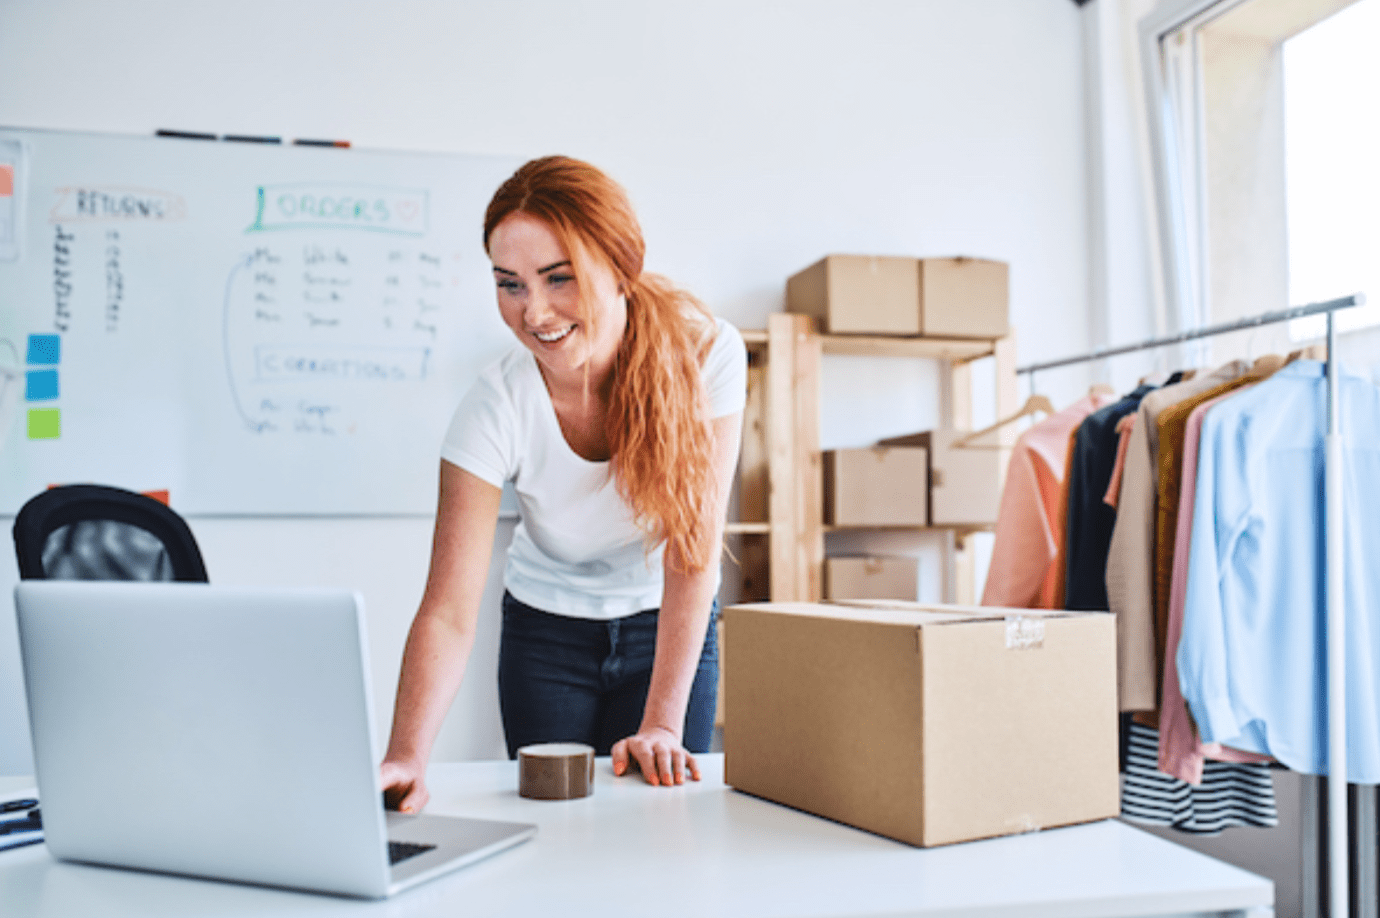 Why You Need Dropshipping Tools for Your New Online Business